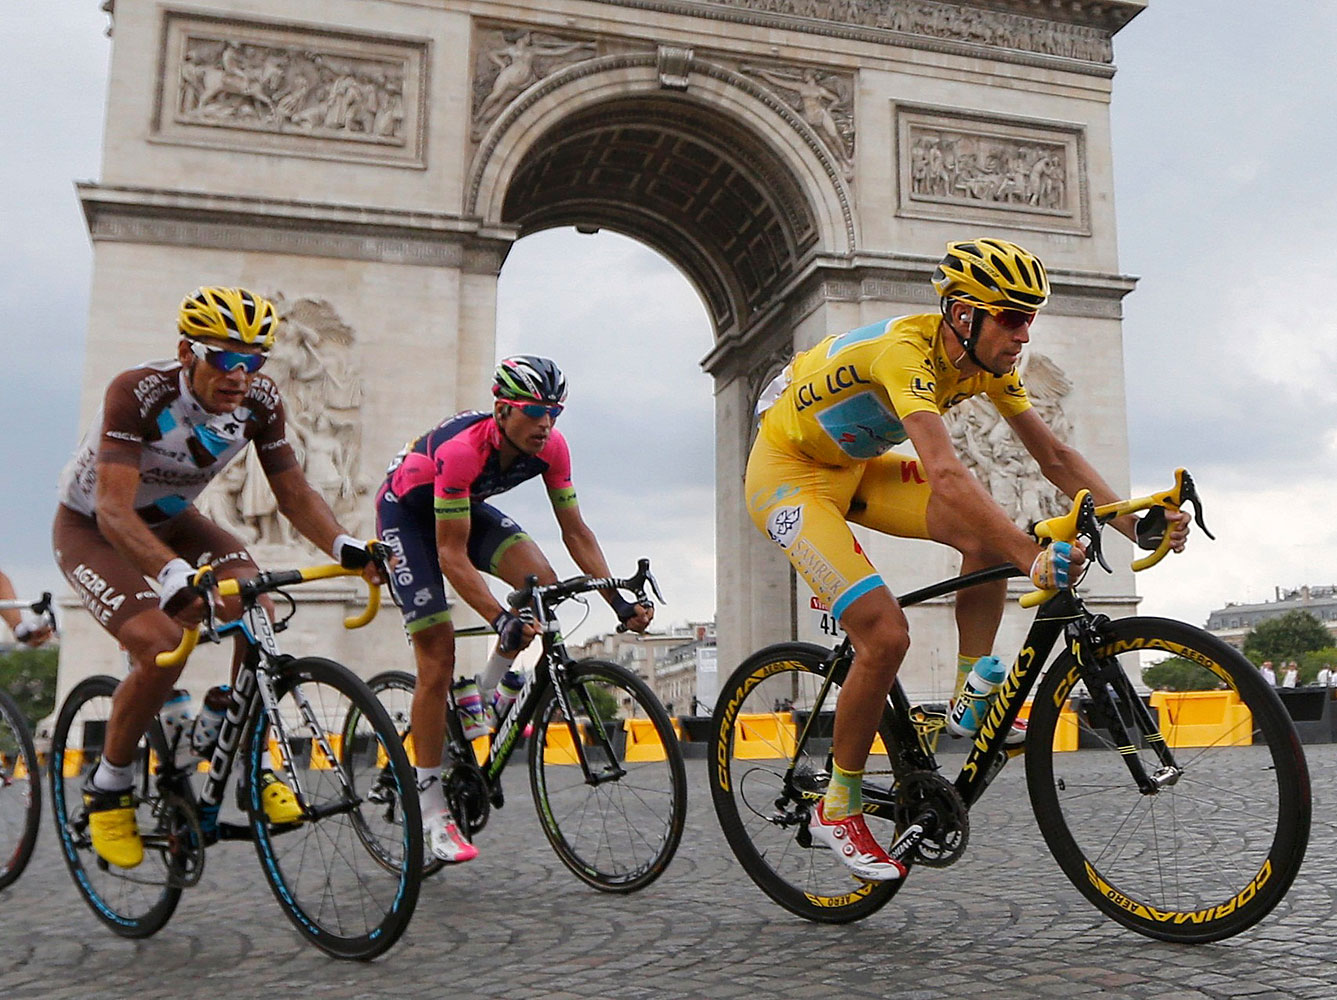 Race leader Astana team rider Vincenzo Nibali of Italy rides near the Arc de Triomphe at the end of the final 21st stage of the Tour de France cycle race in Paris, July 27, 2014. (Jean-Paul Pelissier—Reuters)